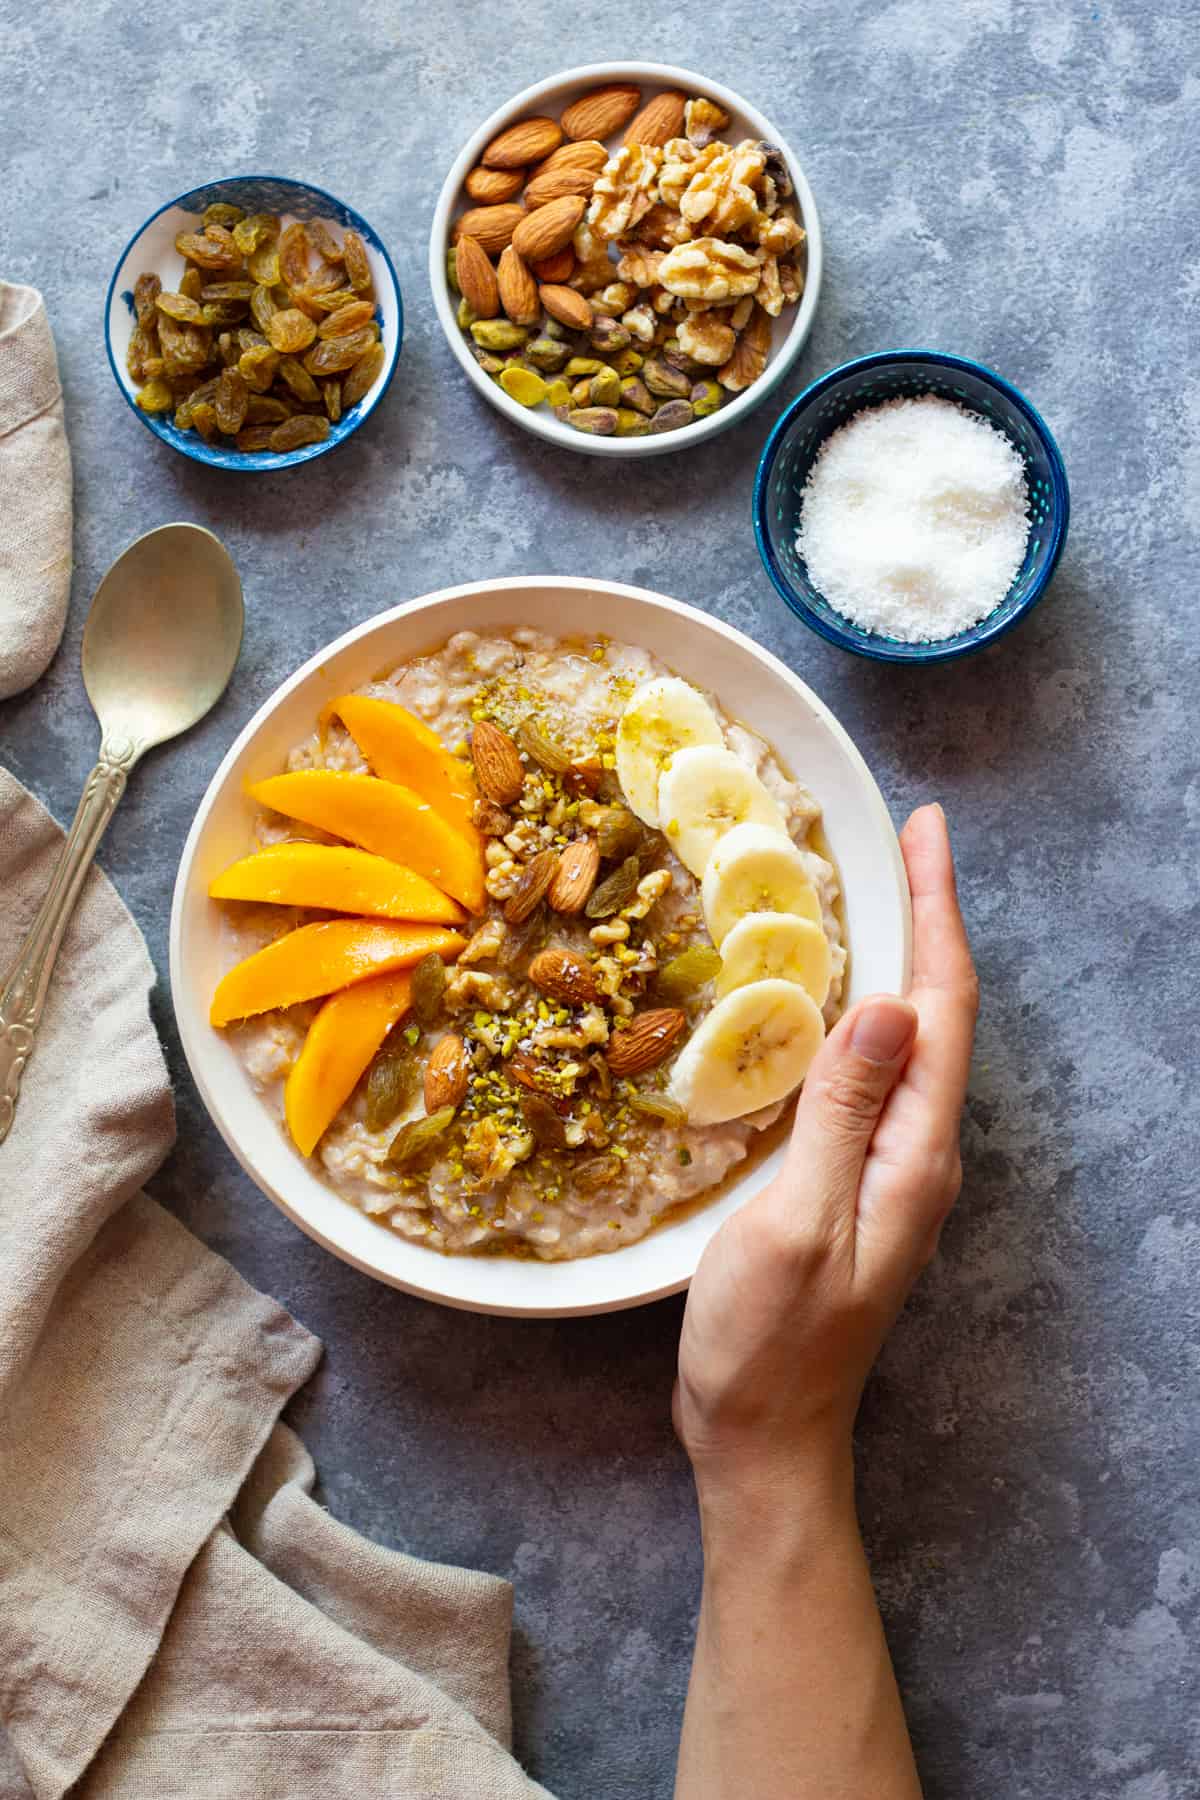 Brighten up your morning with this creamy oatmeal recipe. Adding cardamon and honey to a breakfast staple results in a bold, yet comforting way to start the day.